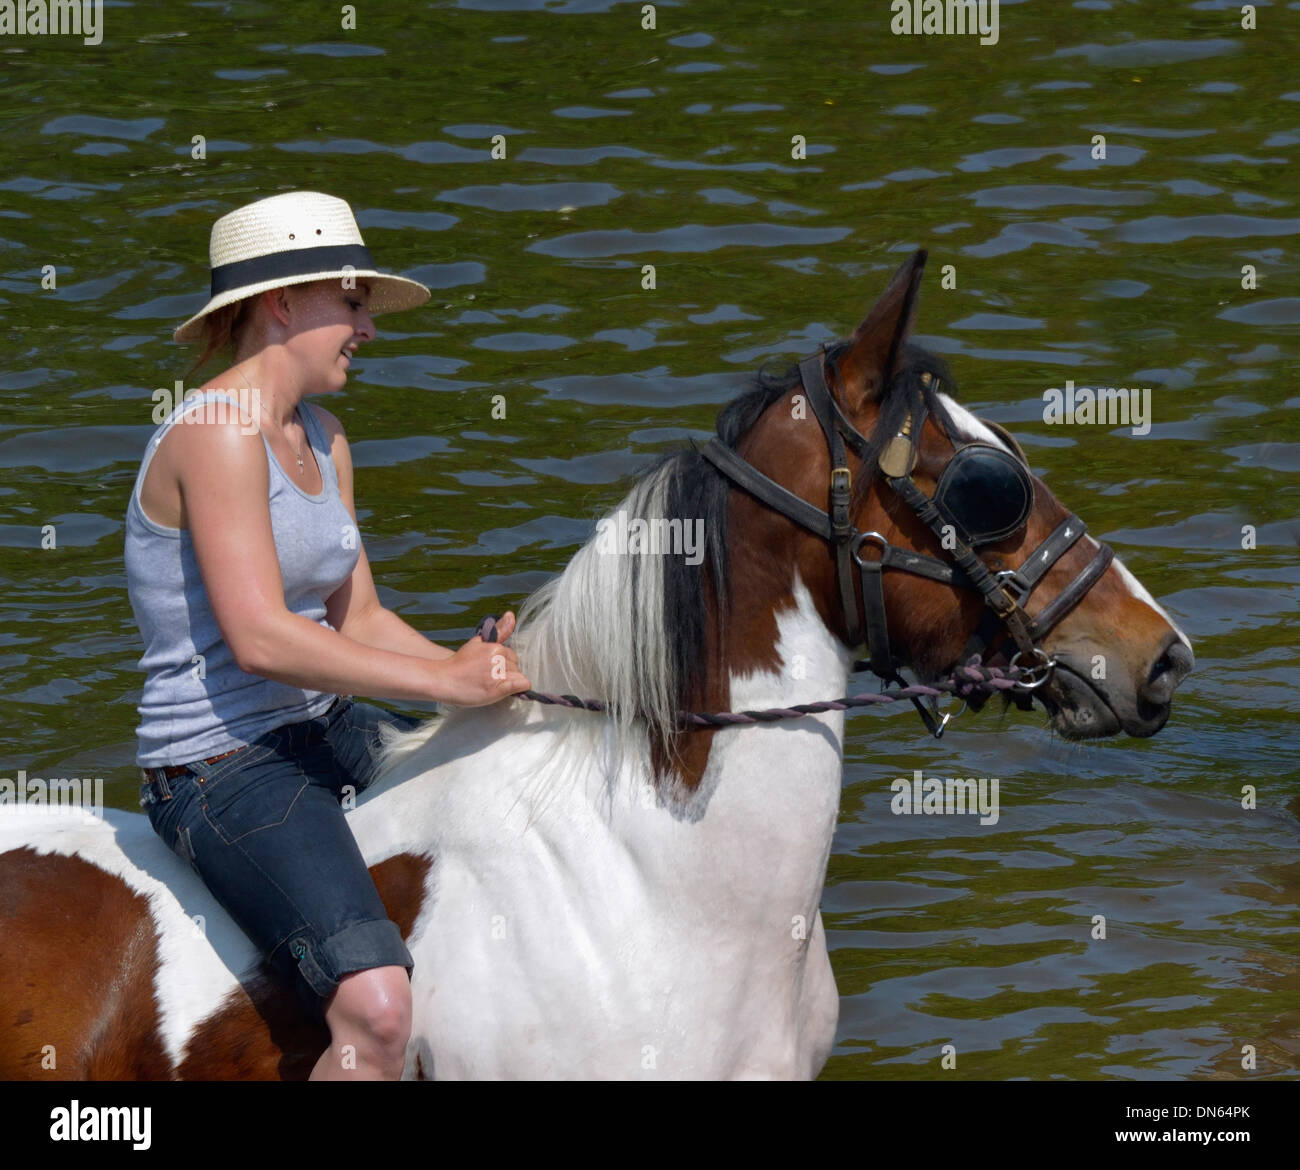 Gypsy traveller girl riding horse in River Eden. Appleby Horse Fair, Appleby-in-Westmorland, Cumbria, England, United Kingdom. Stock Photo